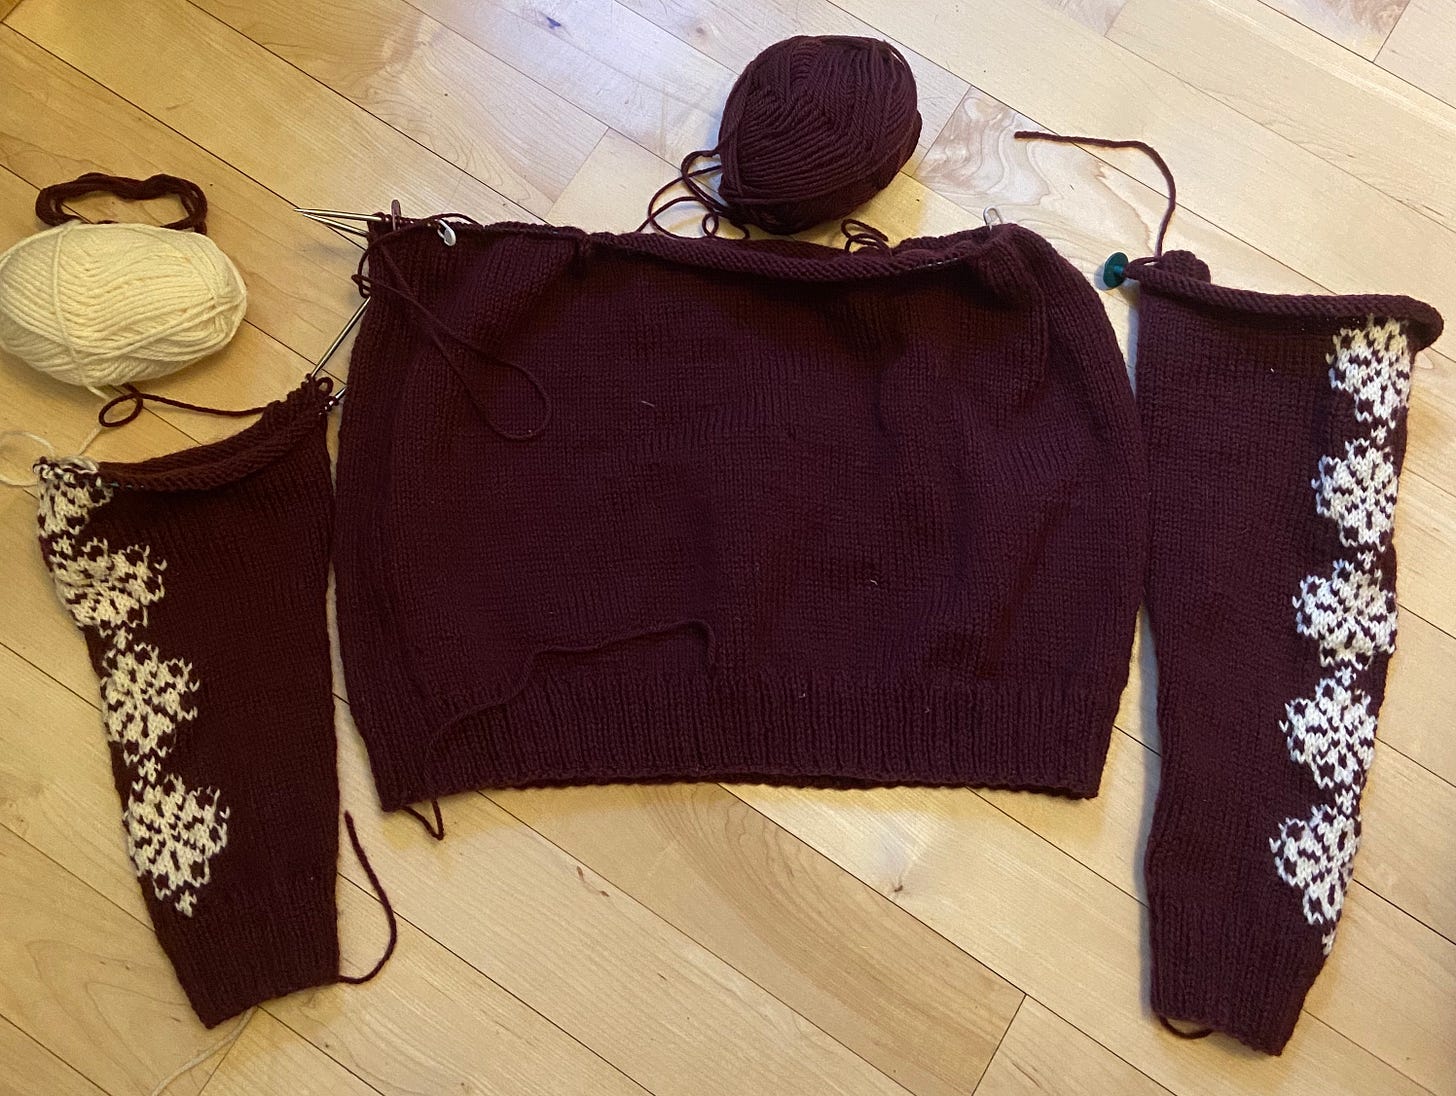 two sleeves, one half knit, and a torso, all on knitting needles, posed on the floor